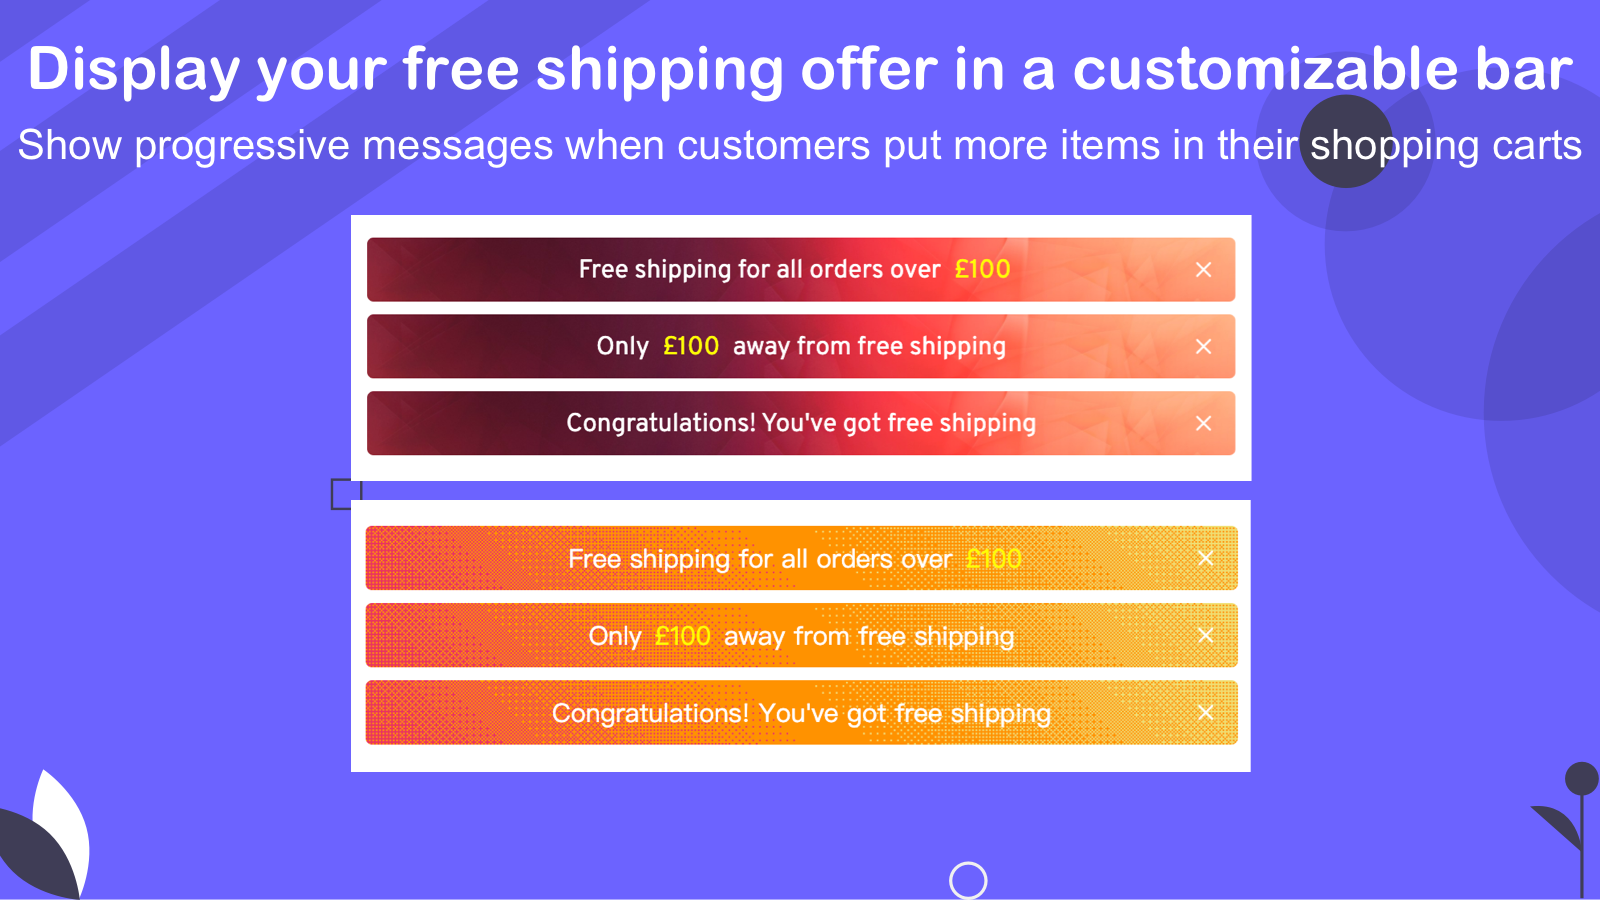 Display your free shipping offer in a customizable bar